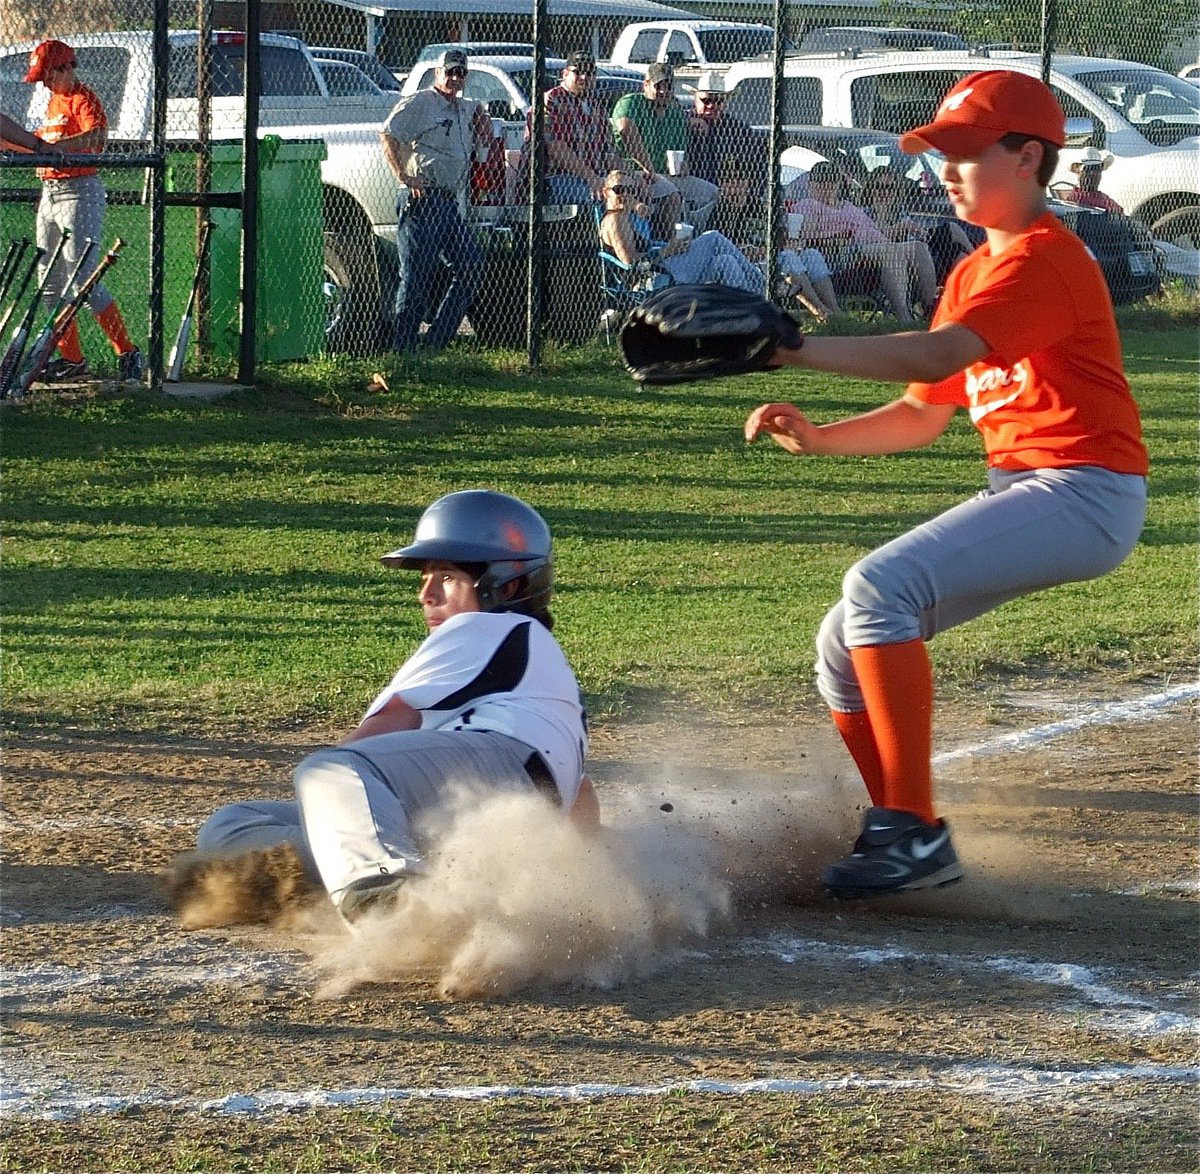 Image: Kyle Fortenberry slides home against Aquilla — The IYAA Baseball/Softball seasons are underway as Kyle Fortenberry tries to stir up a comeback against the Aquilla Cougars in 12 &amp; under boys baseball action at the Upchurch Ball Fields in Italy on Thursday.